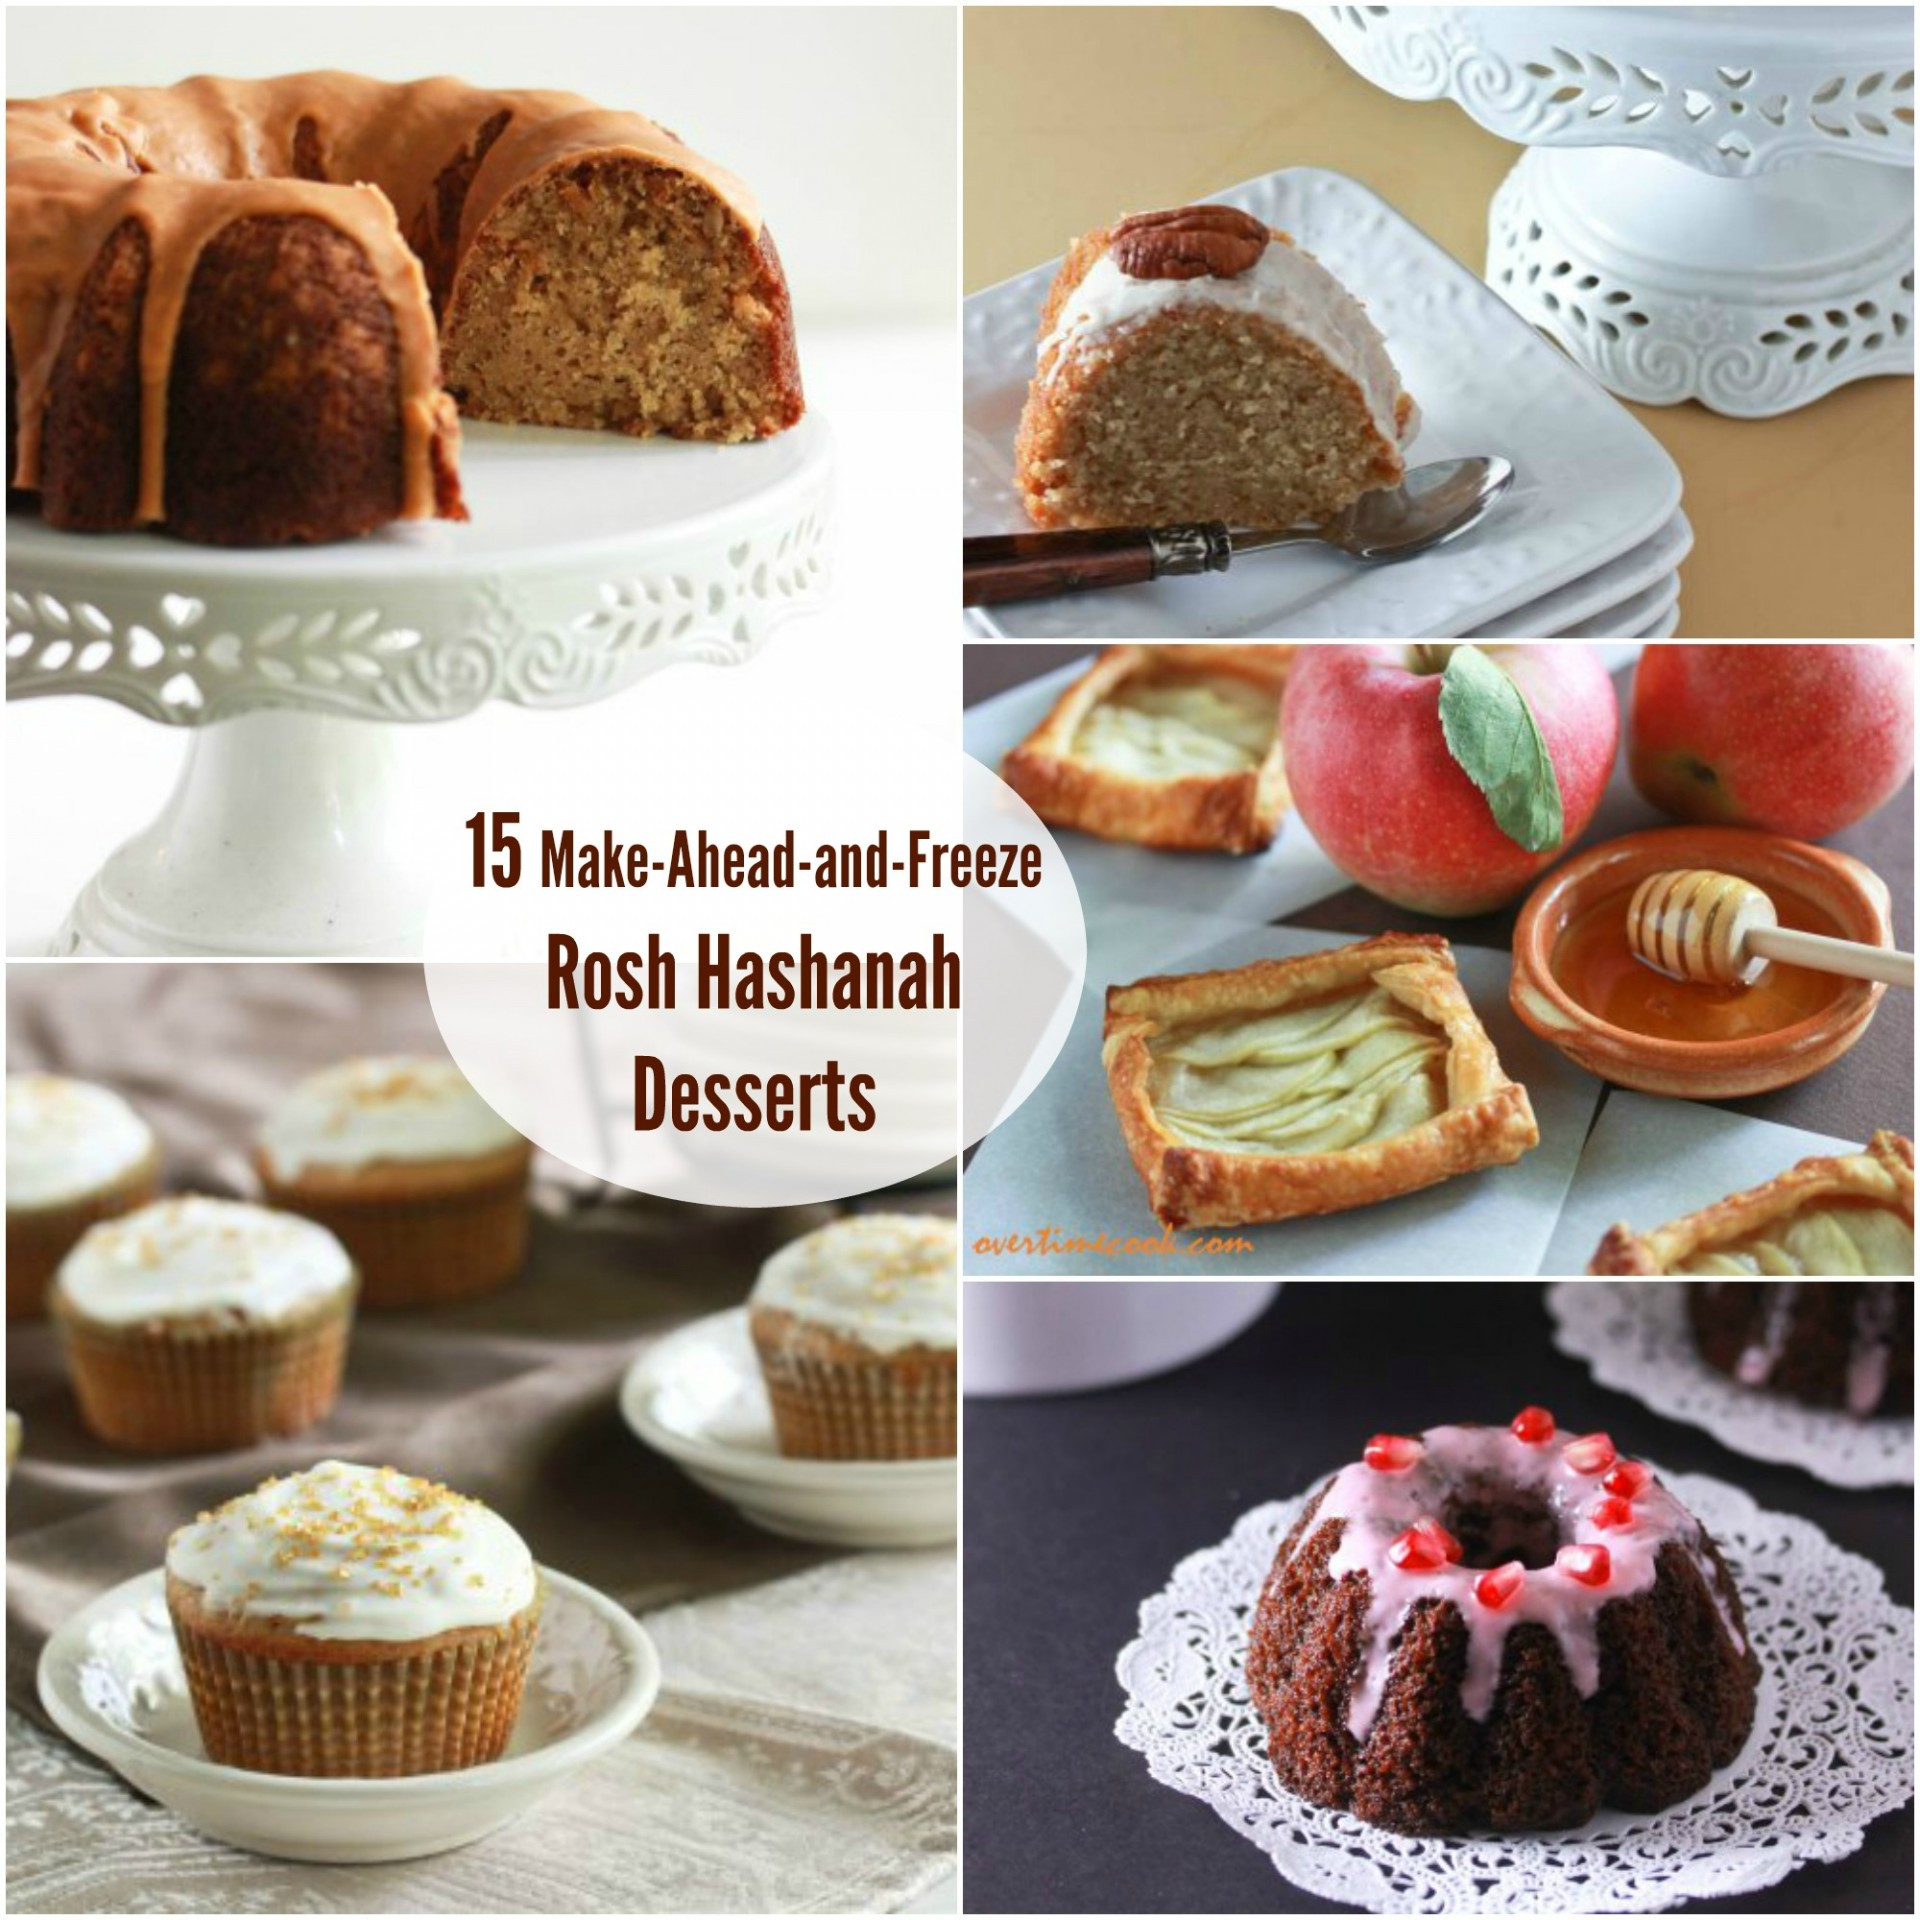 Make Ahead Desserts That Freeze Well
 15 Desserts to Make Ahead and Freeze for Rosh Hashanah